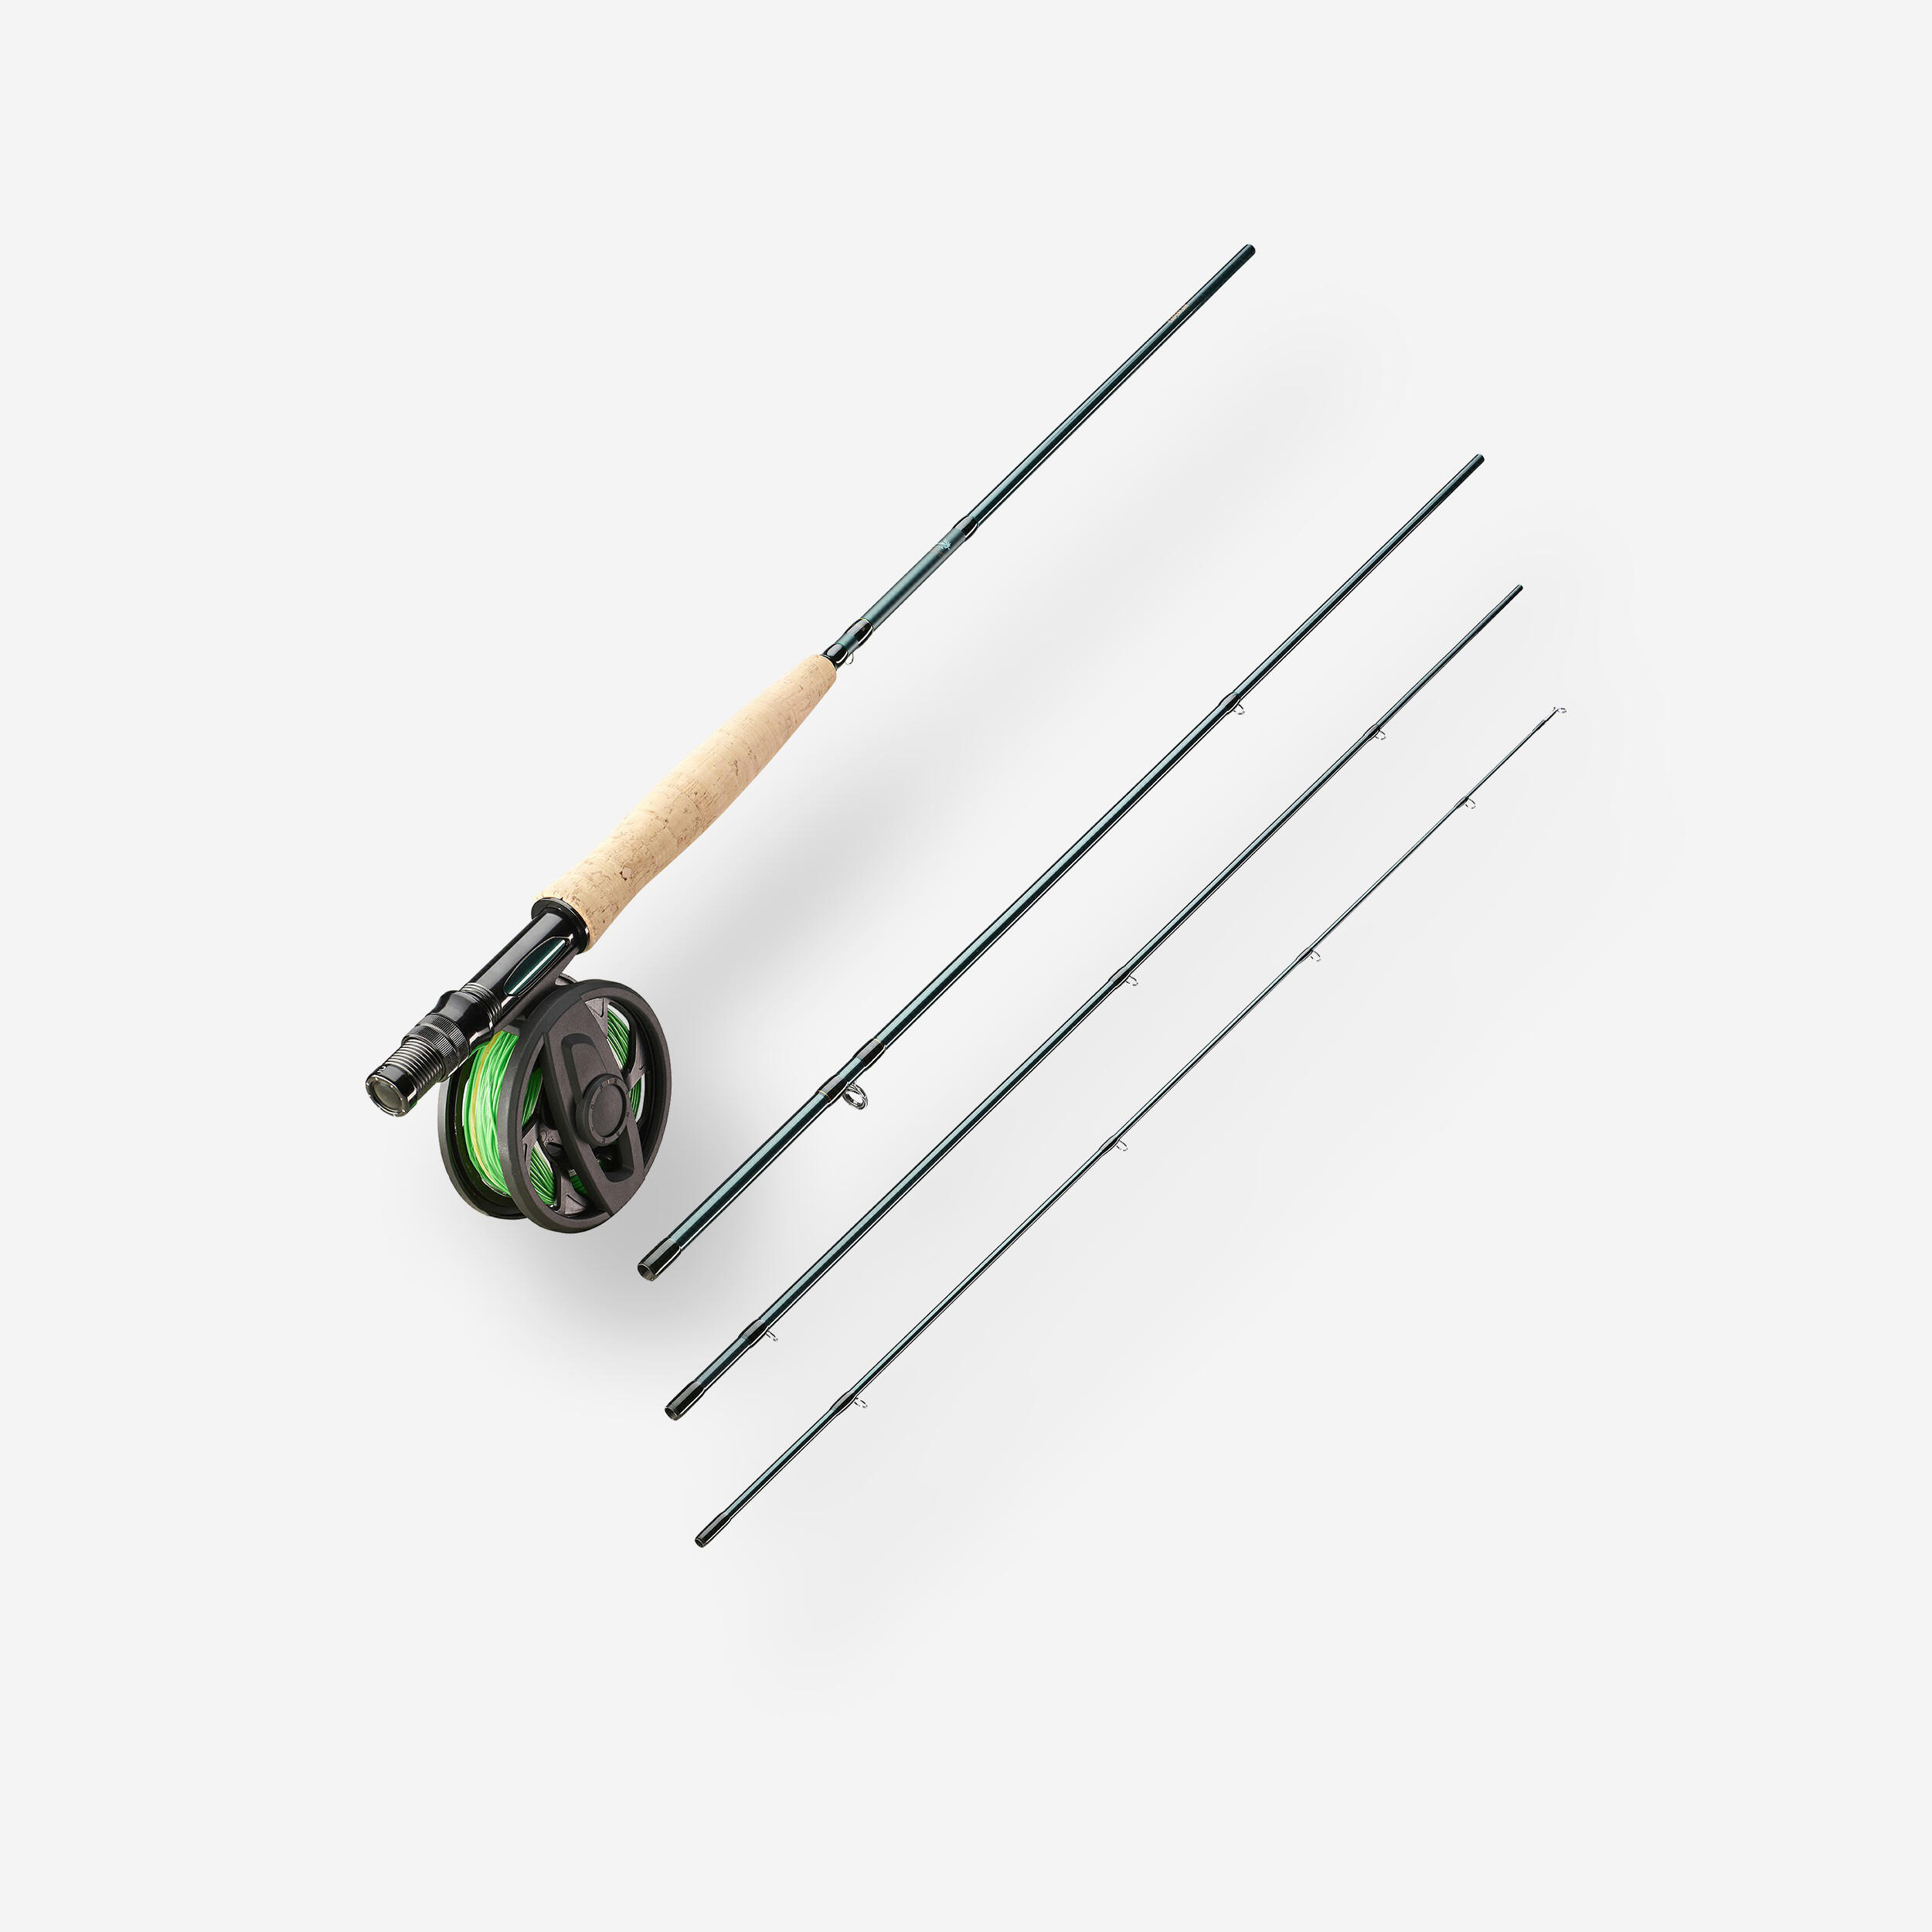 Shop for Rod and Reel Combo - Bushcraft Base Camp